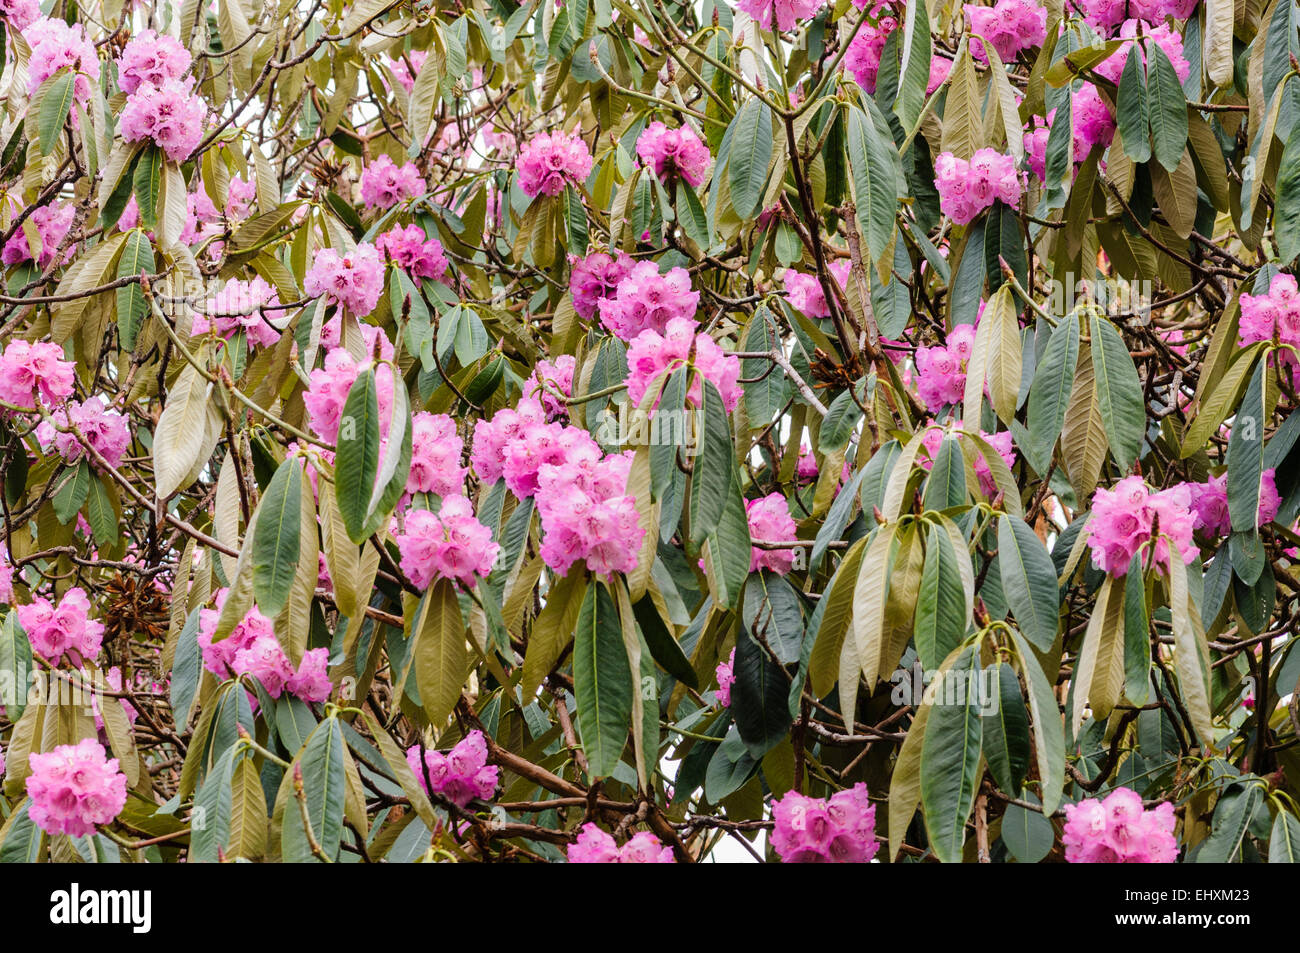 Rhododendron bush starts to flower marking the start of spring Stock Photo